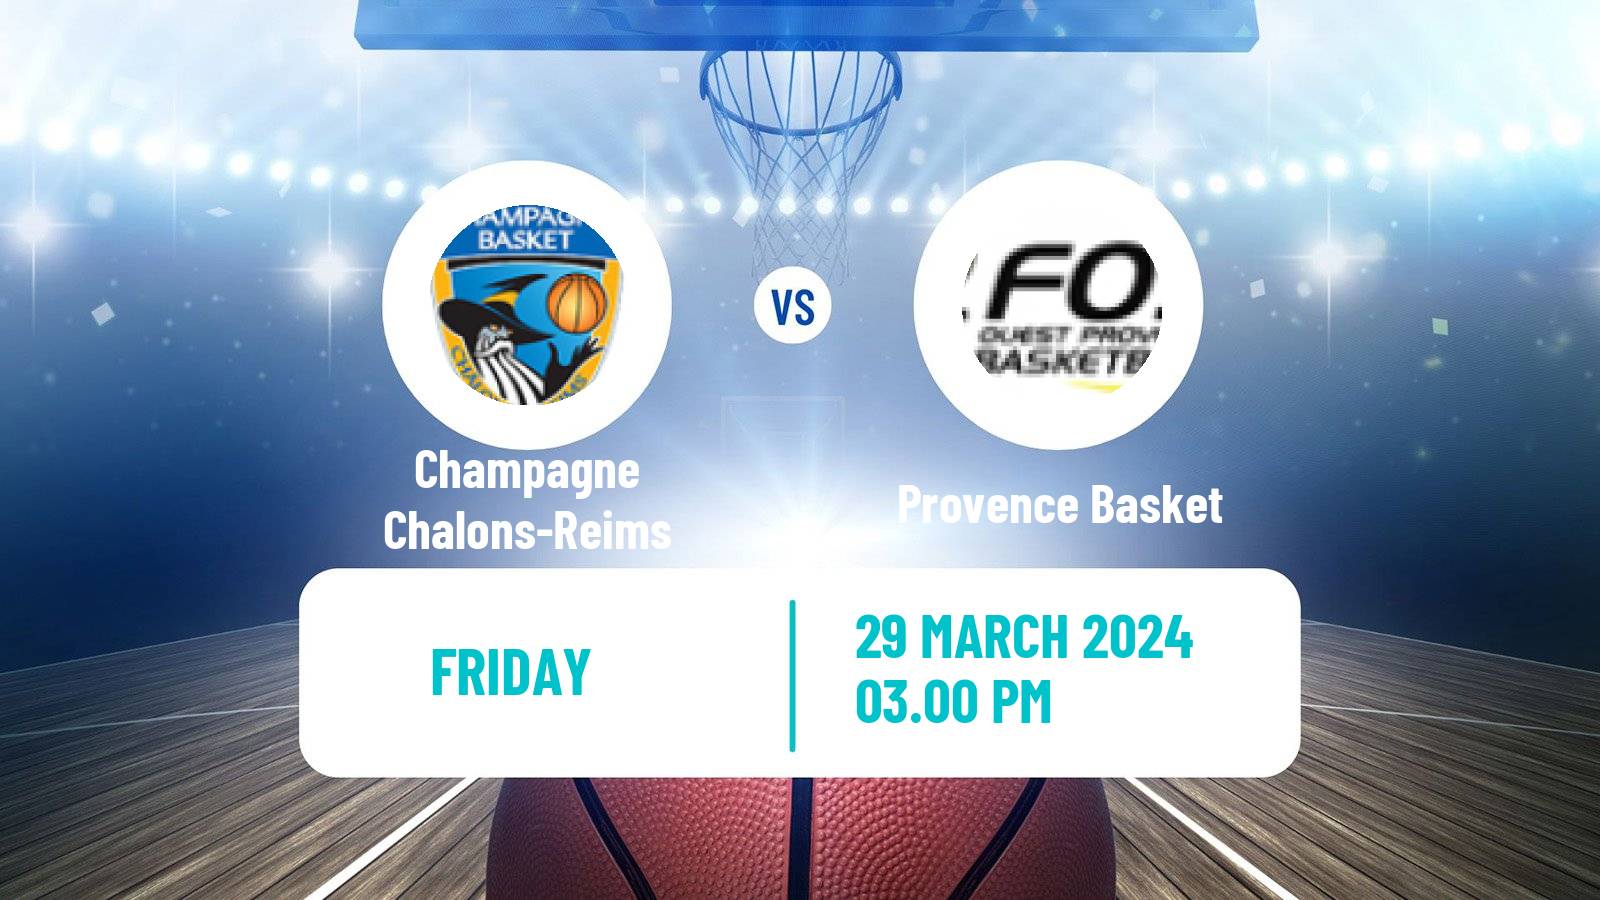 Basketball French LNB Pro B Champagne Chalons-Reims - Provence Basket